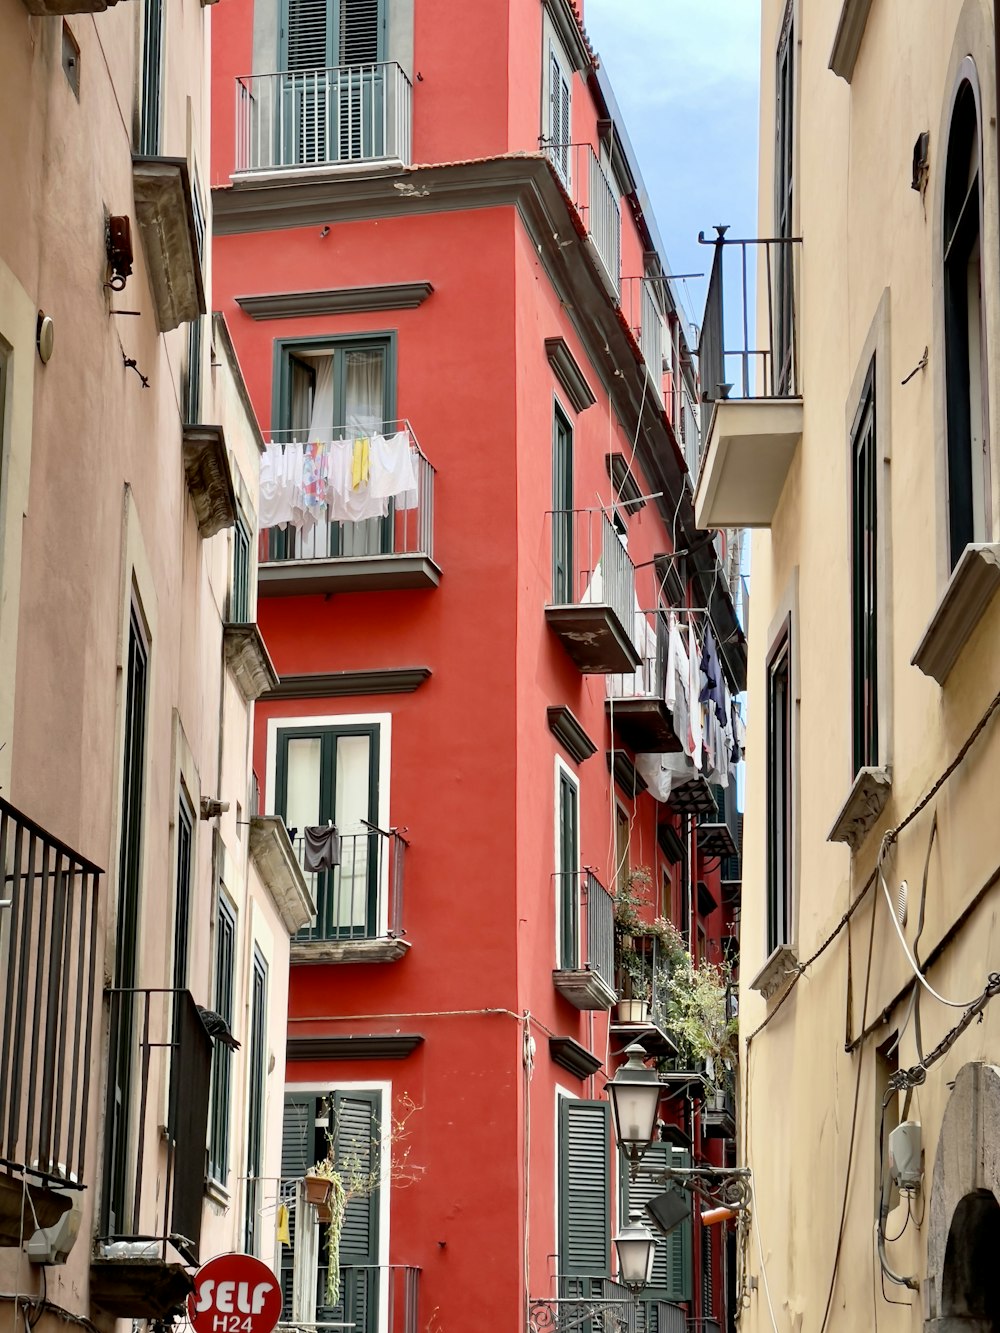 a red building with balconies and balconies on the balconies